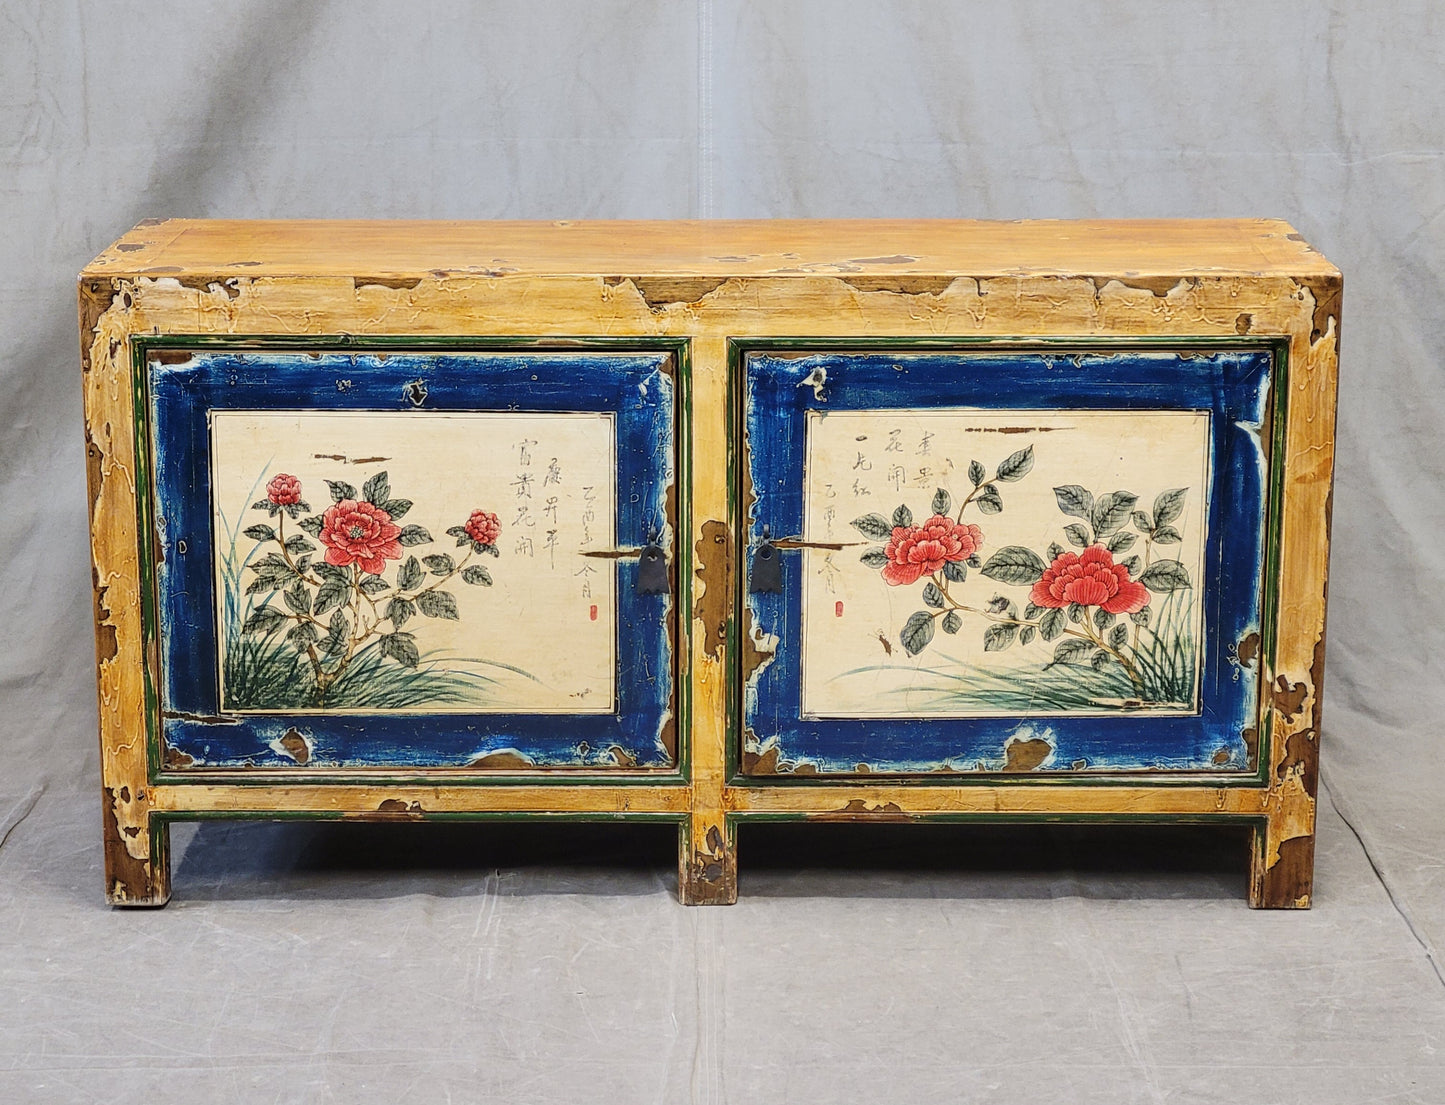 Vintage Chinese Distressed Lacquer Storage Cabinet Console With Floral Motif